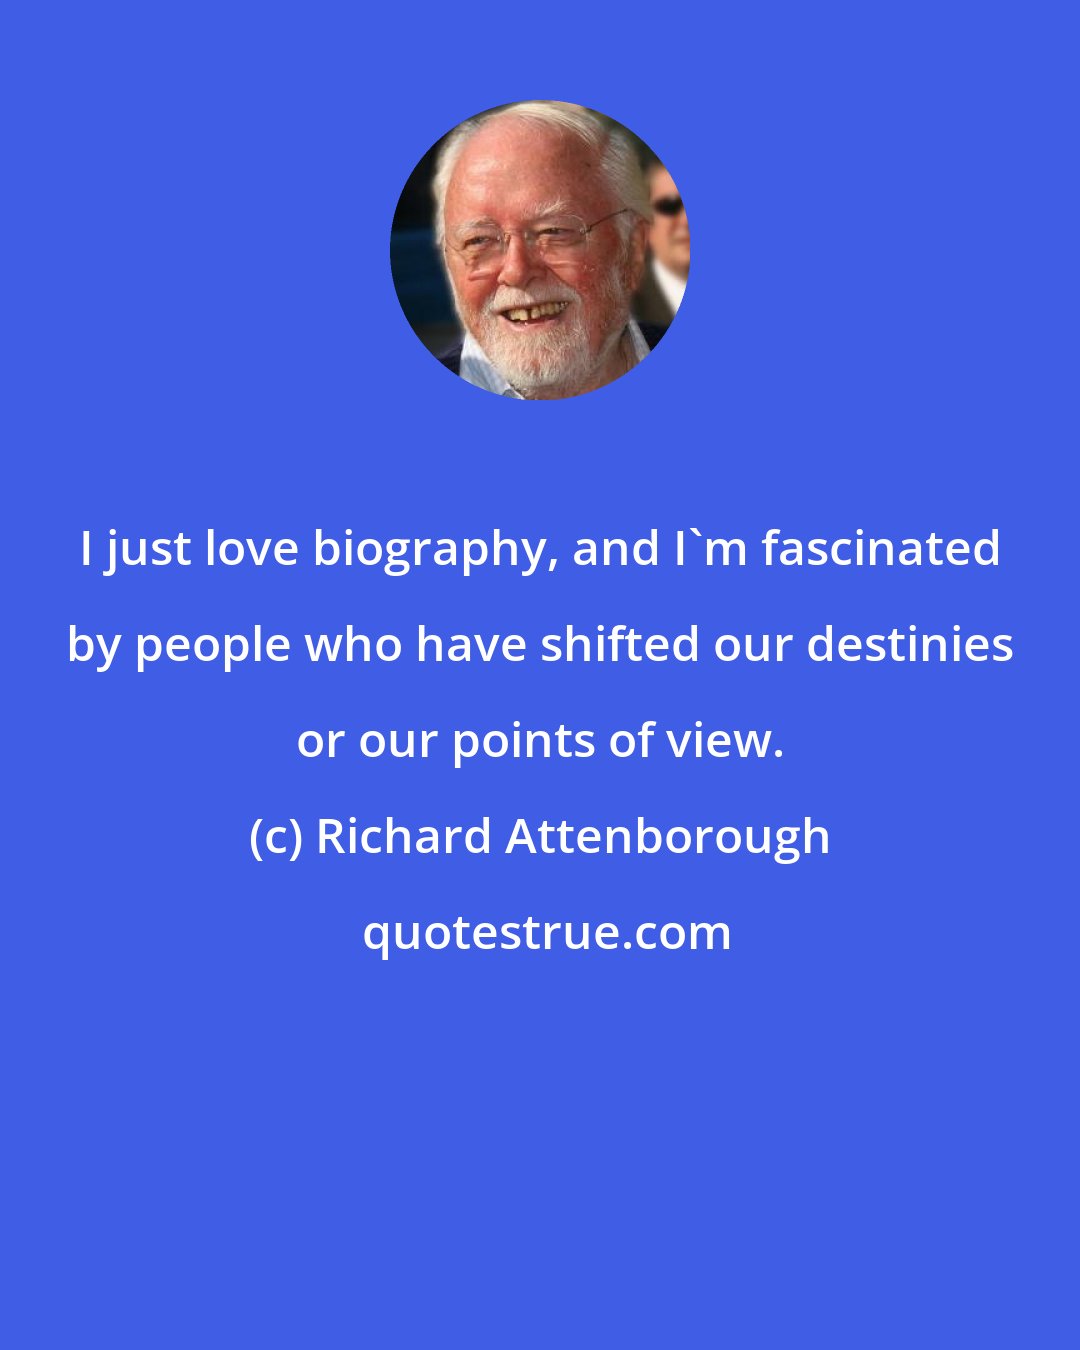 Richard Attenborough: I just love biography, and I'm fascinated by people who have shifted our destinies or our points of view.